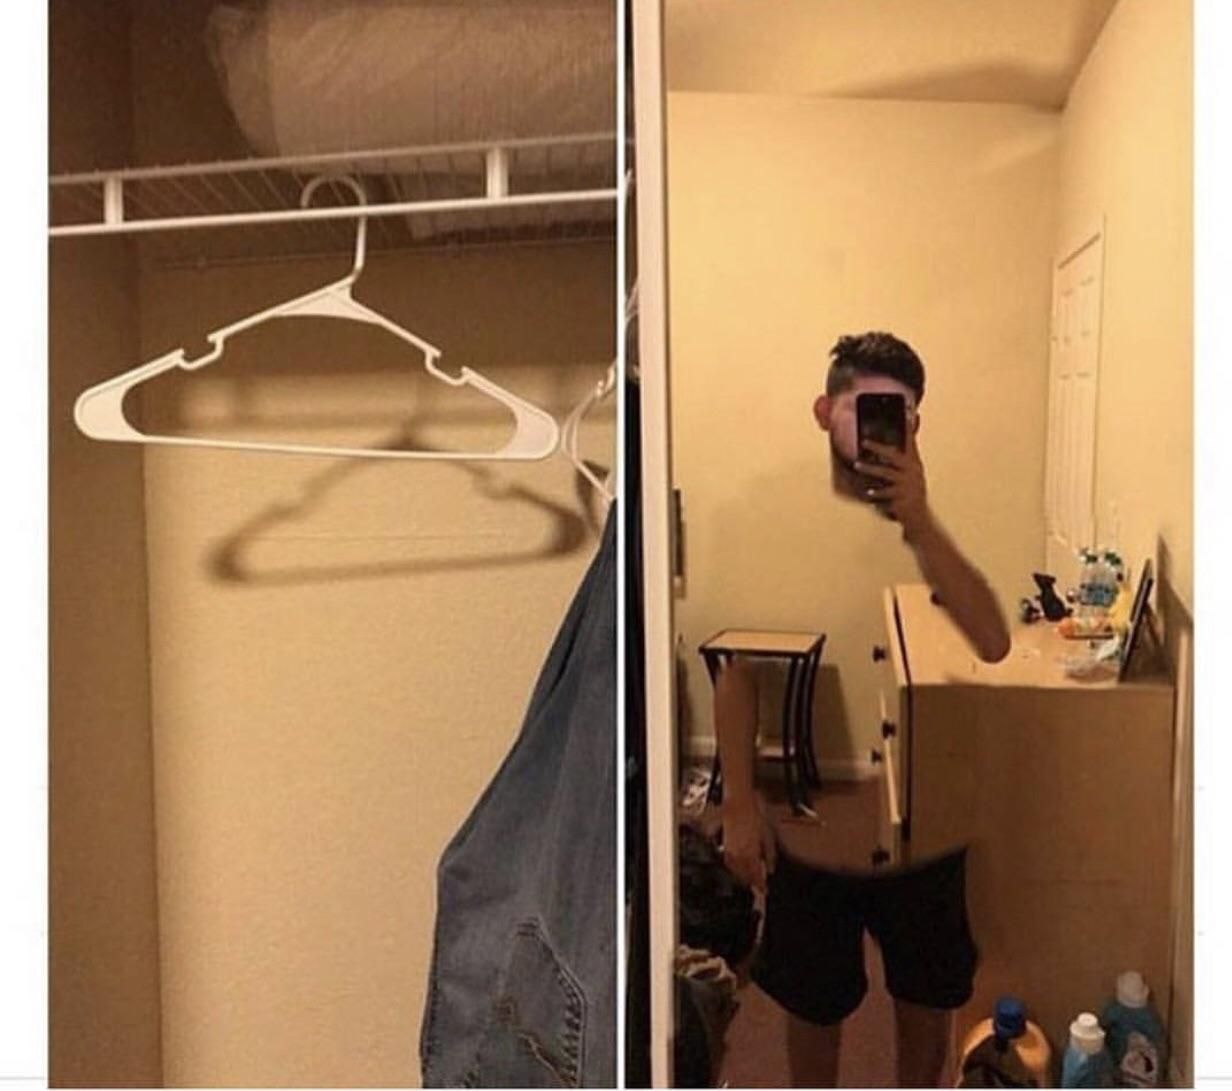 Selling my camo shirt. PM me